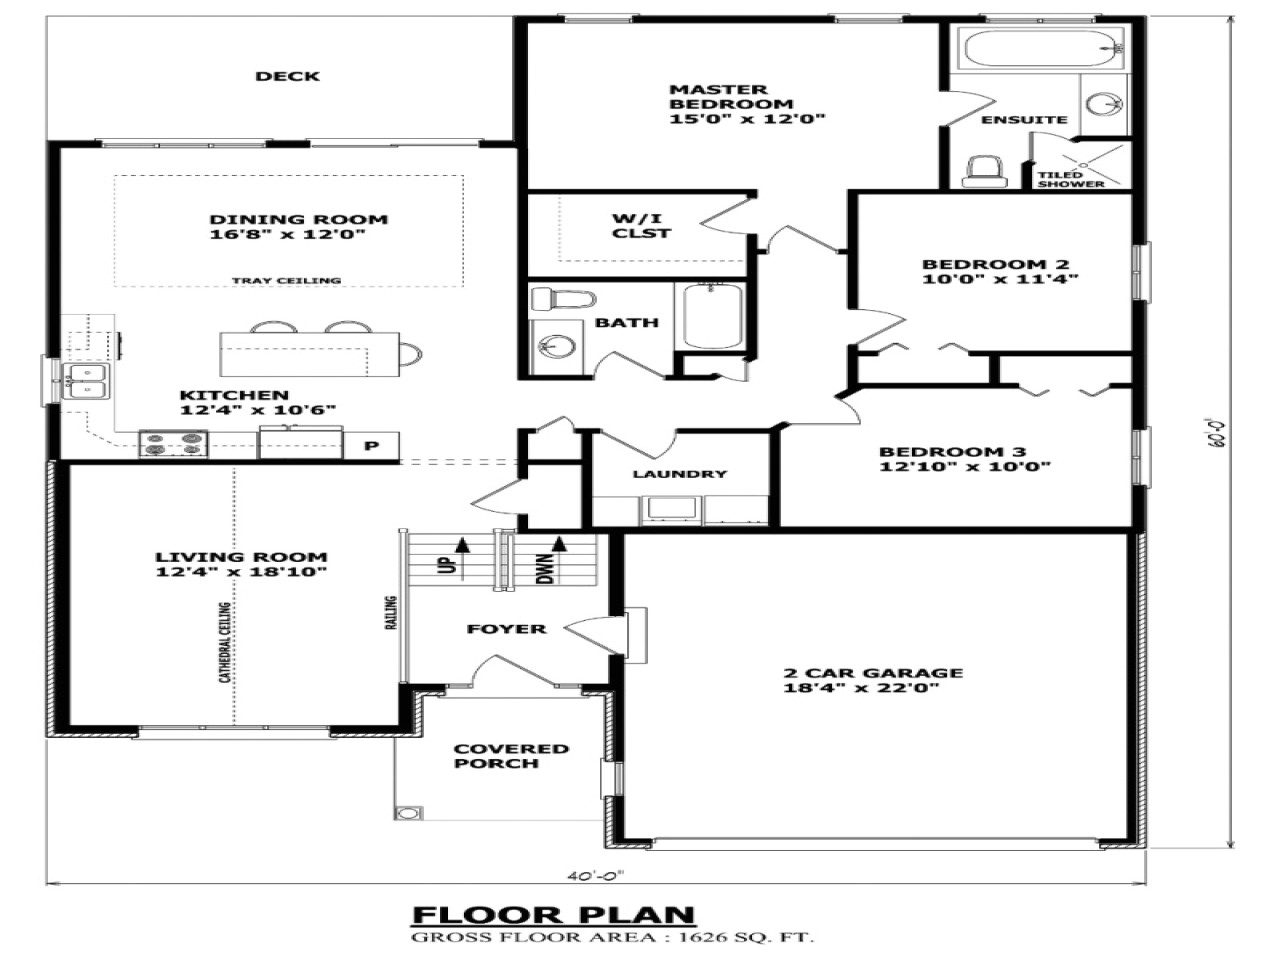 bcd99e85de61b48b canadian house plans french canadian style house plans